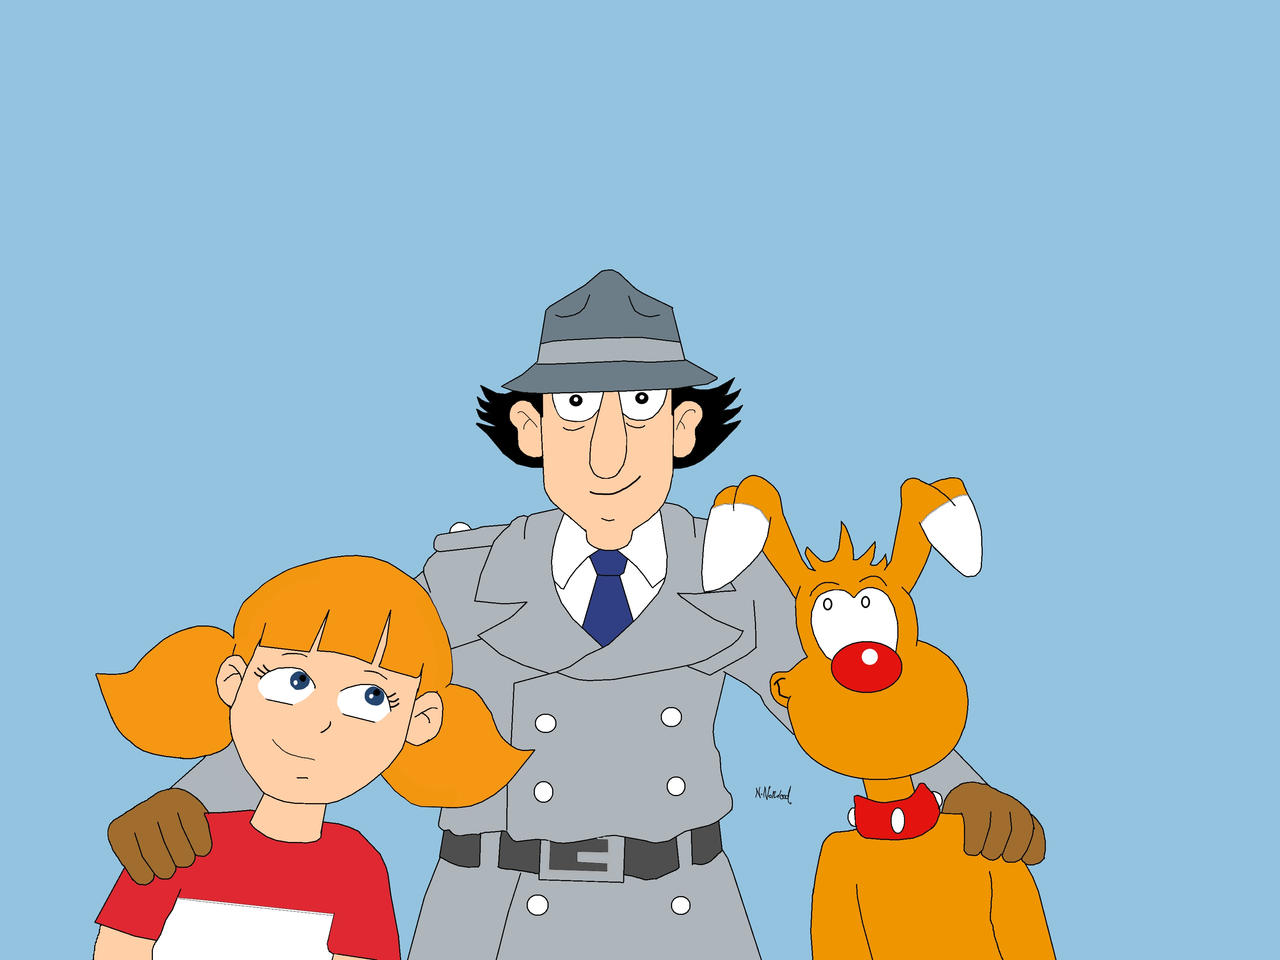 Inspector Gadget - Gadget , Penny and Brain by NiallNorwood66 on DeviantArt